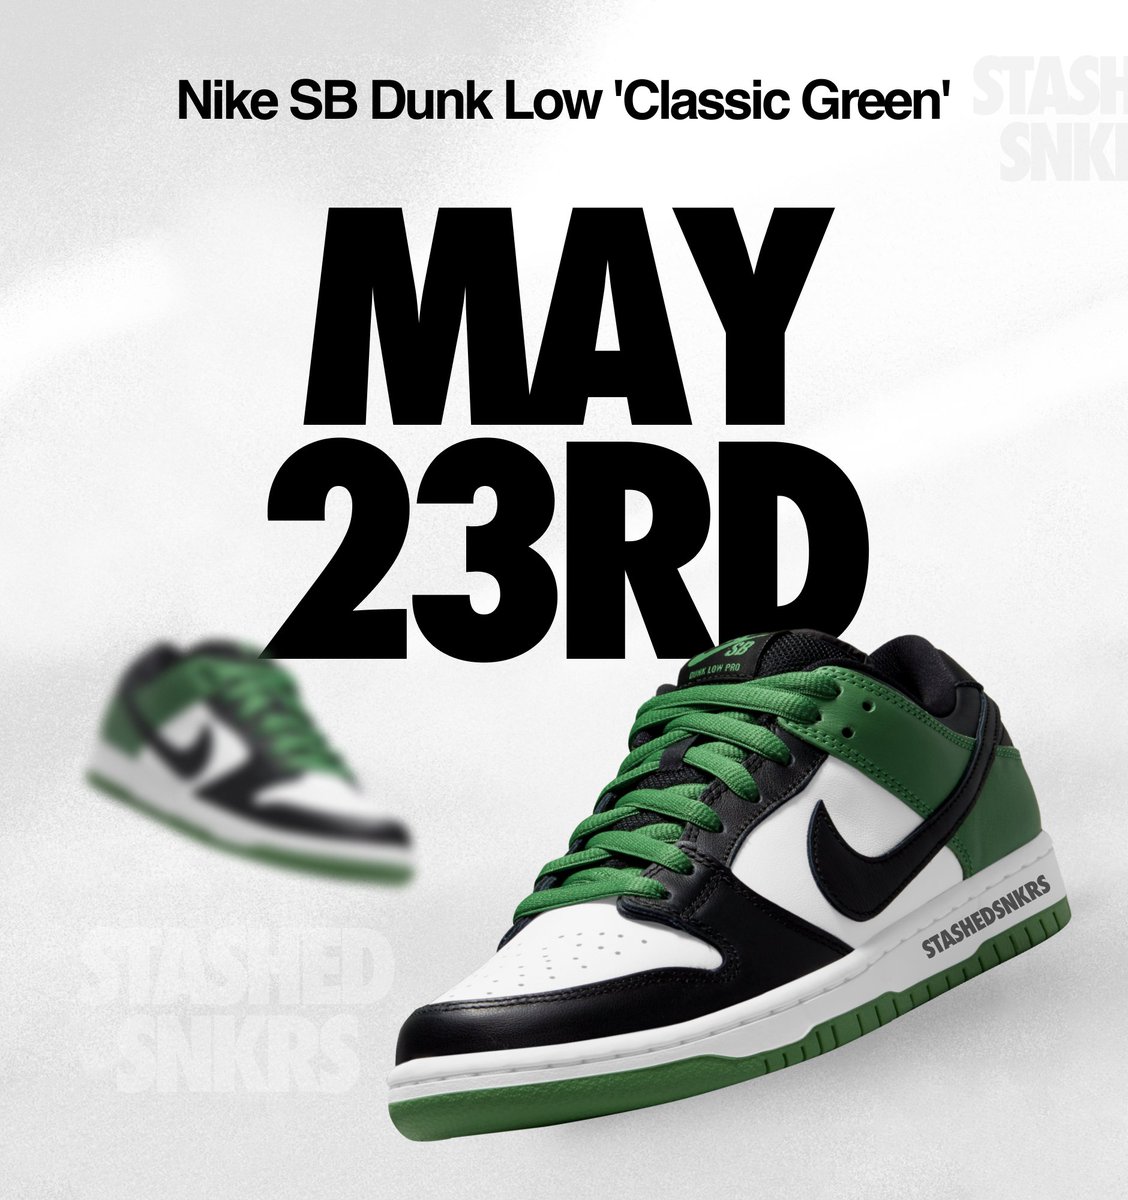 JUST LOADED: Nike SB Dunk Low 'Classic Green' 🍀 Restocking May 23rd on the SNKRS App 🇪🇺🇬🇧